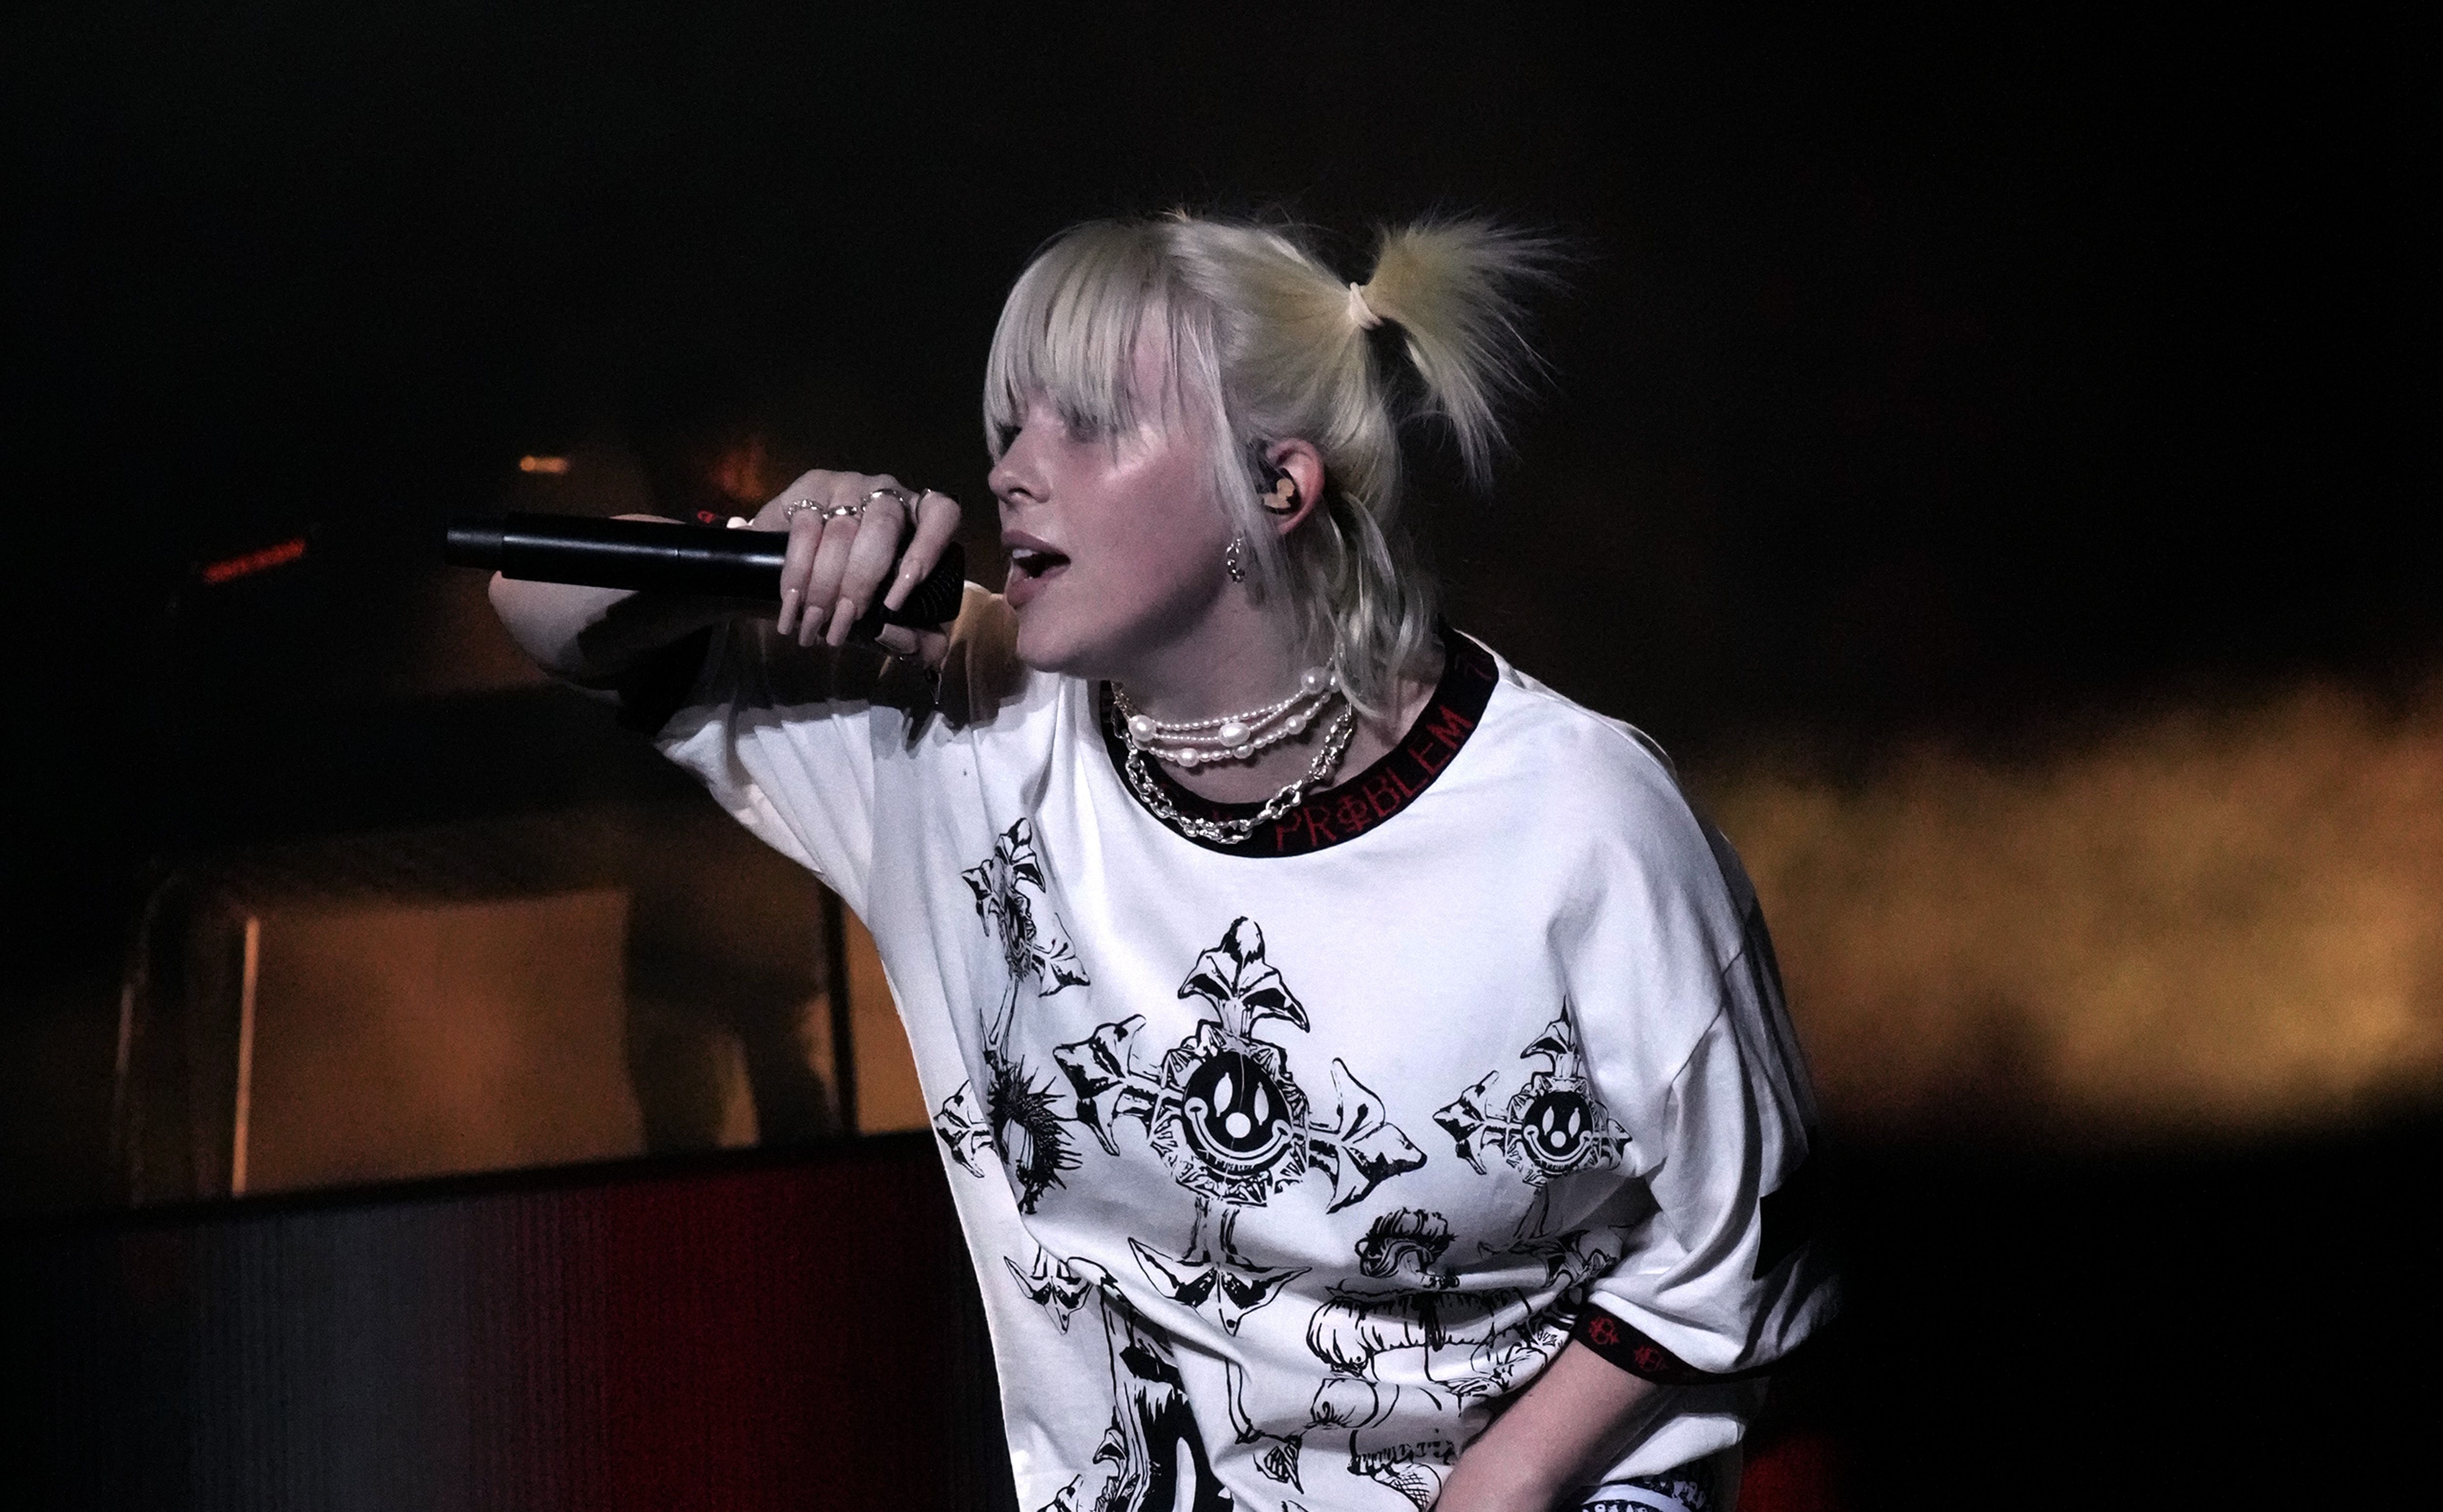 Billie Eilish sings on stage in a white T-Shirt and her short blond hair in high pigtails.